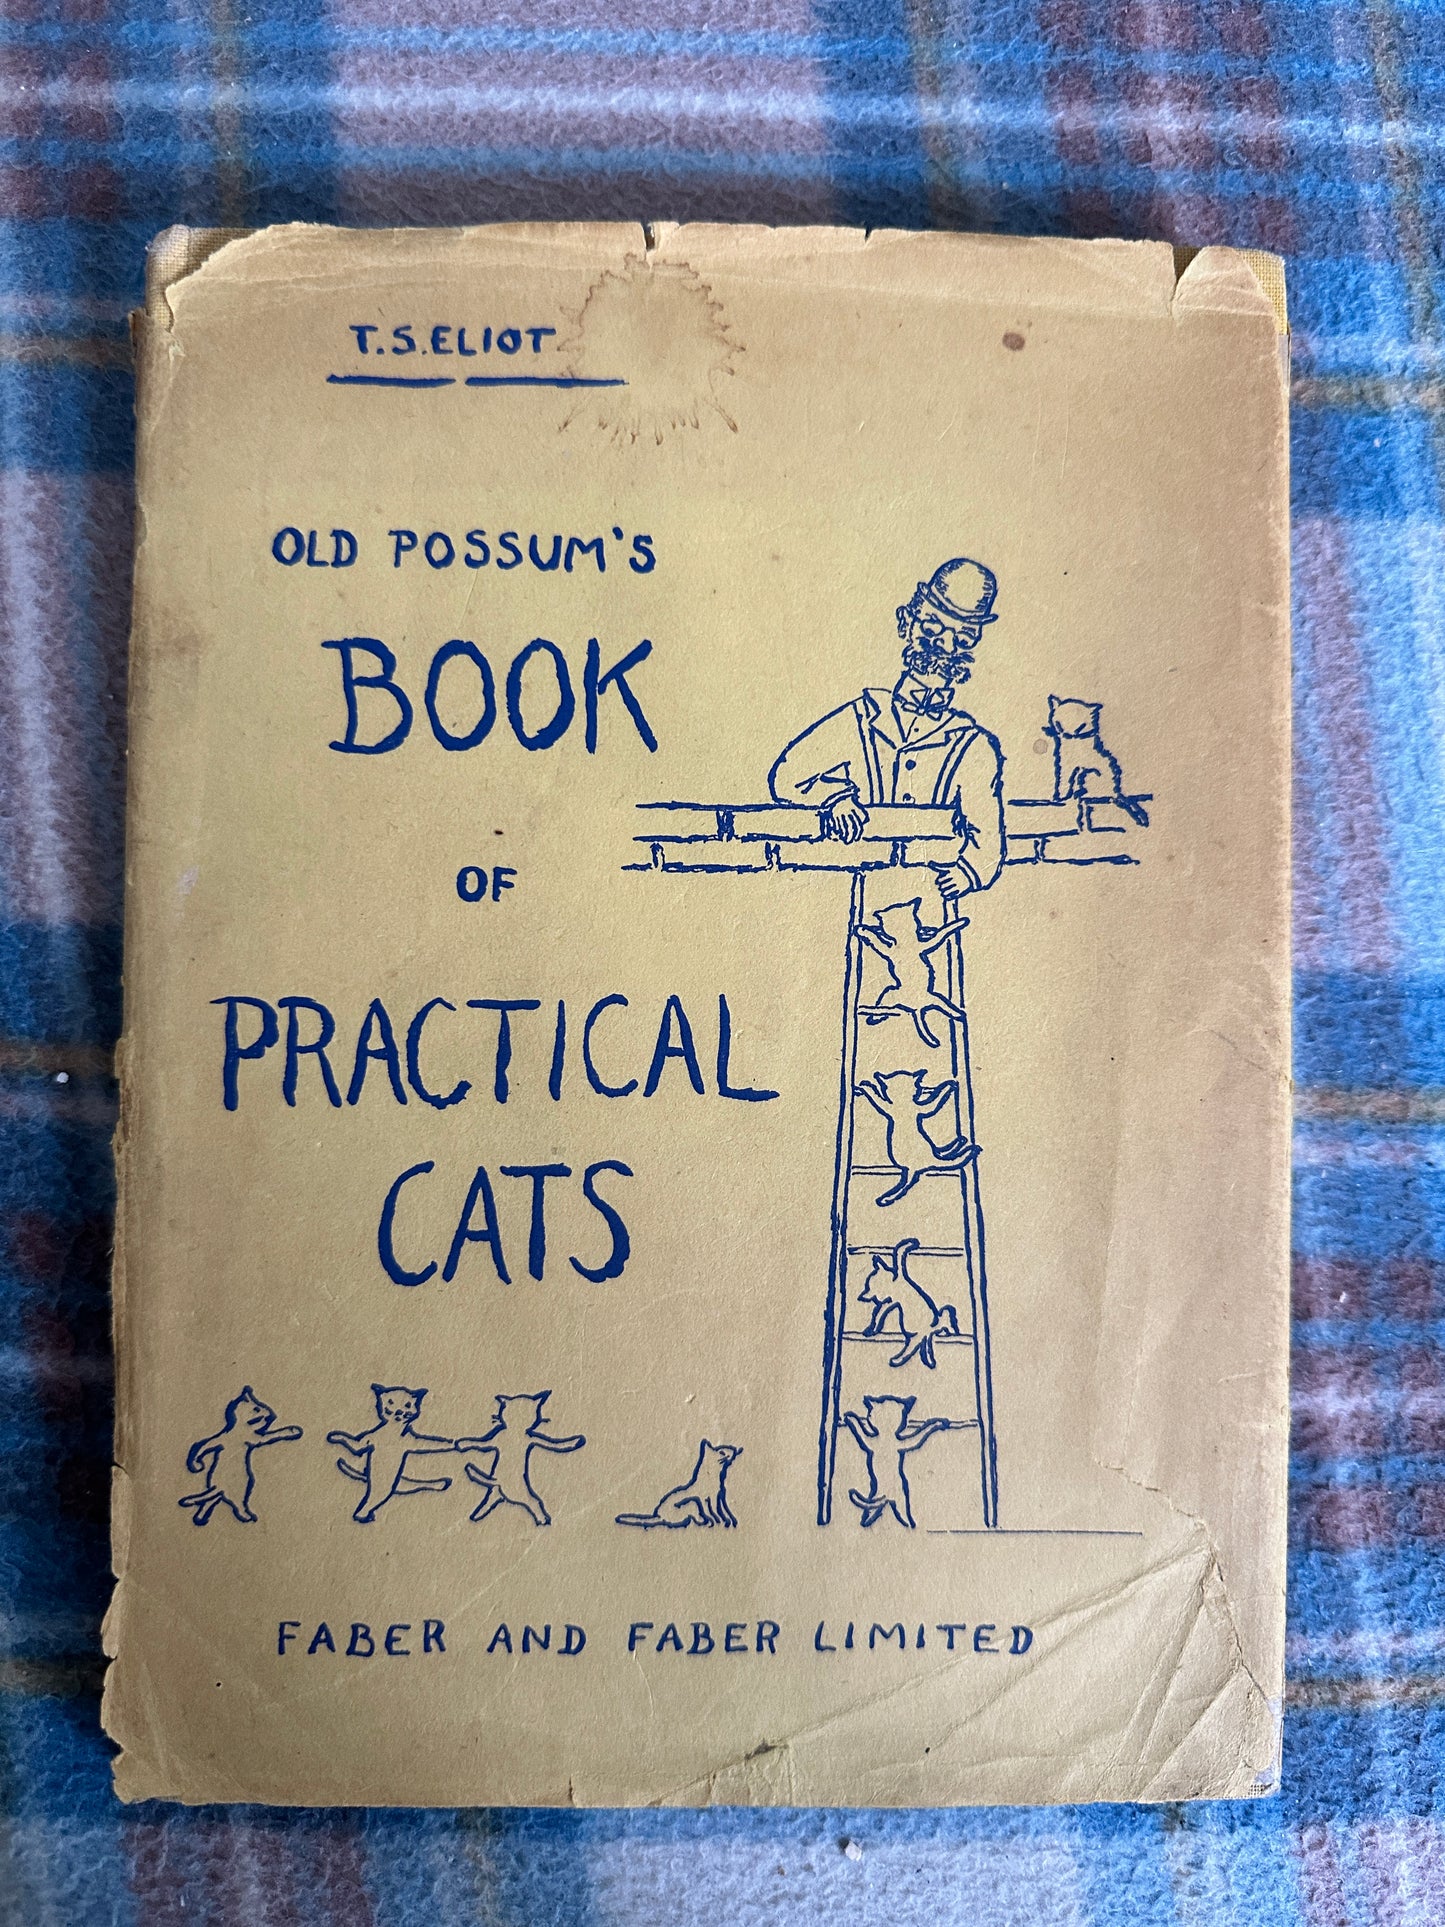 1956 Old Possum’s Book Of Practical Cats - T. S. Eliot(Faber & Faber)